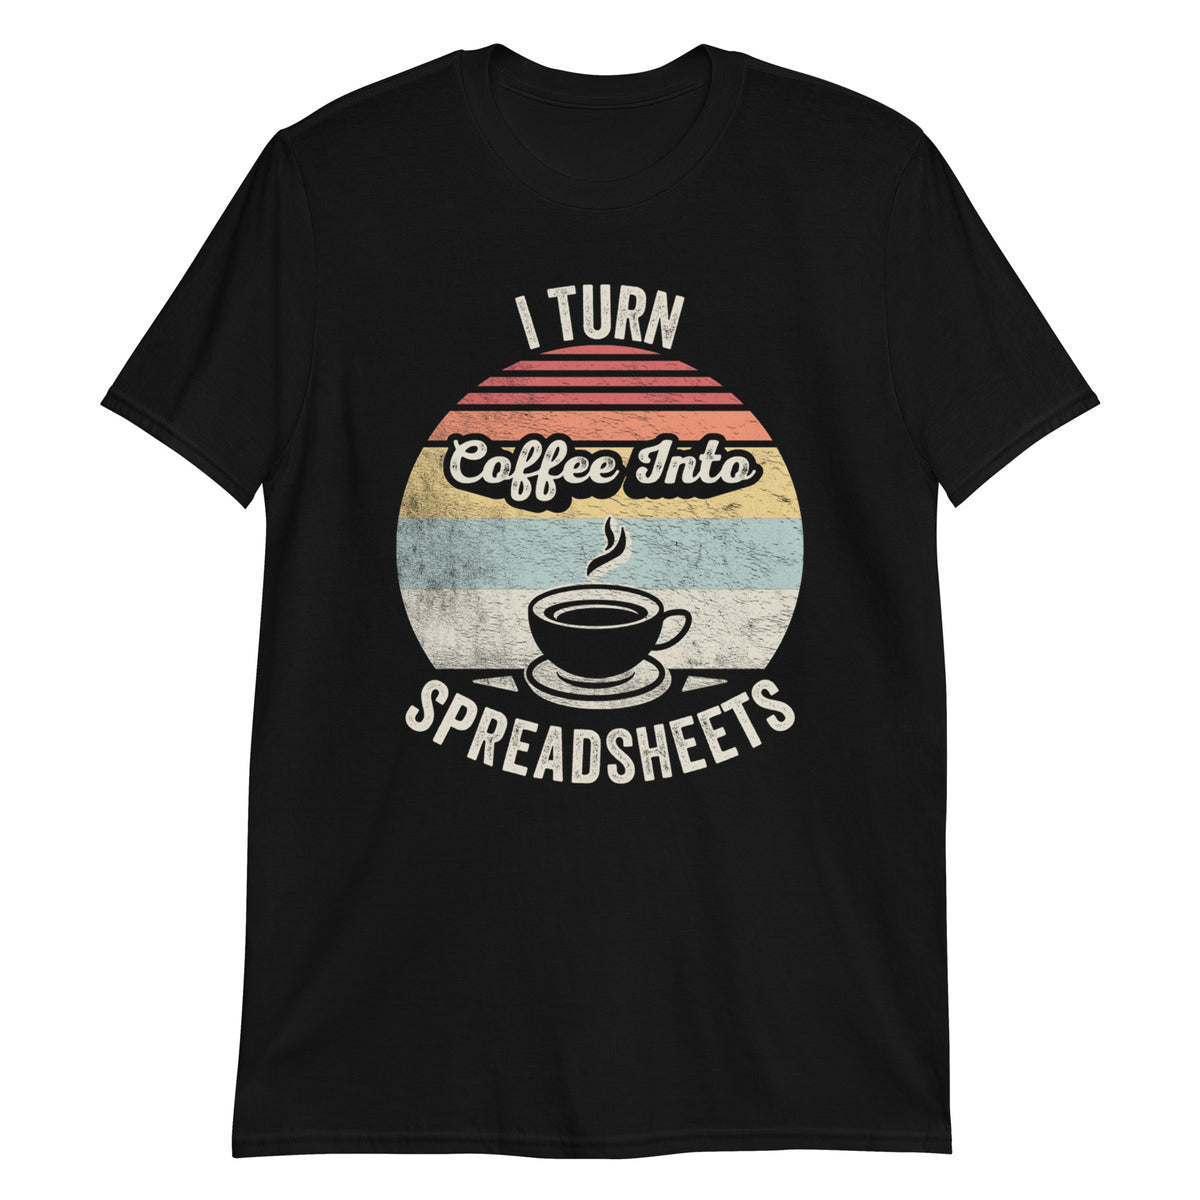 I Turn Coffee Into Spreadsheets T-Shirt